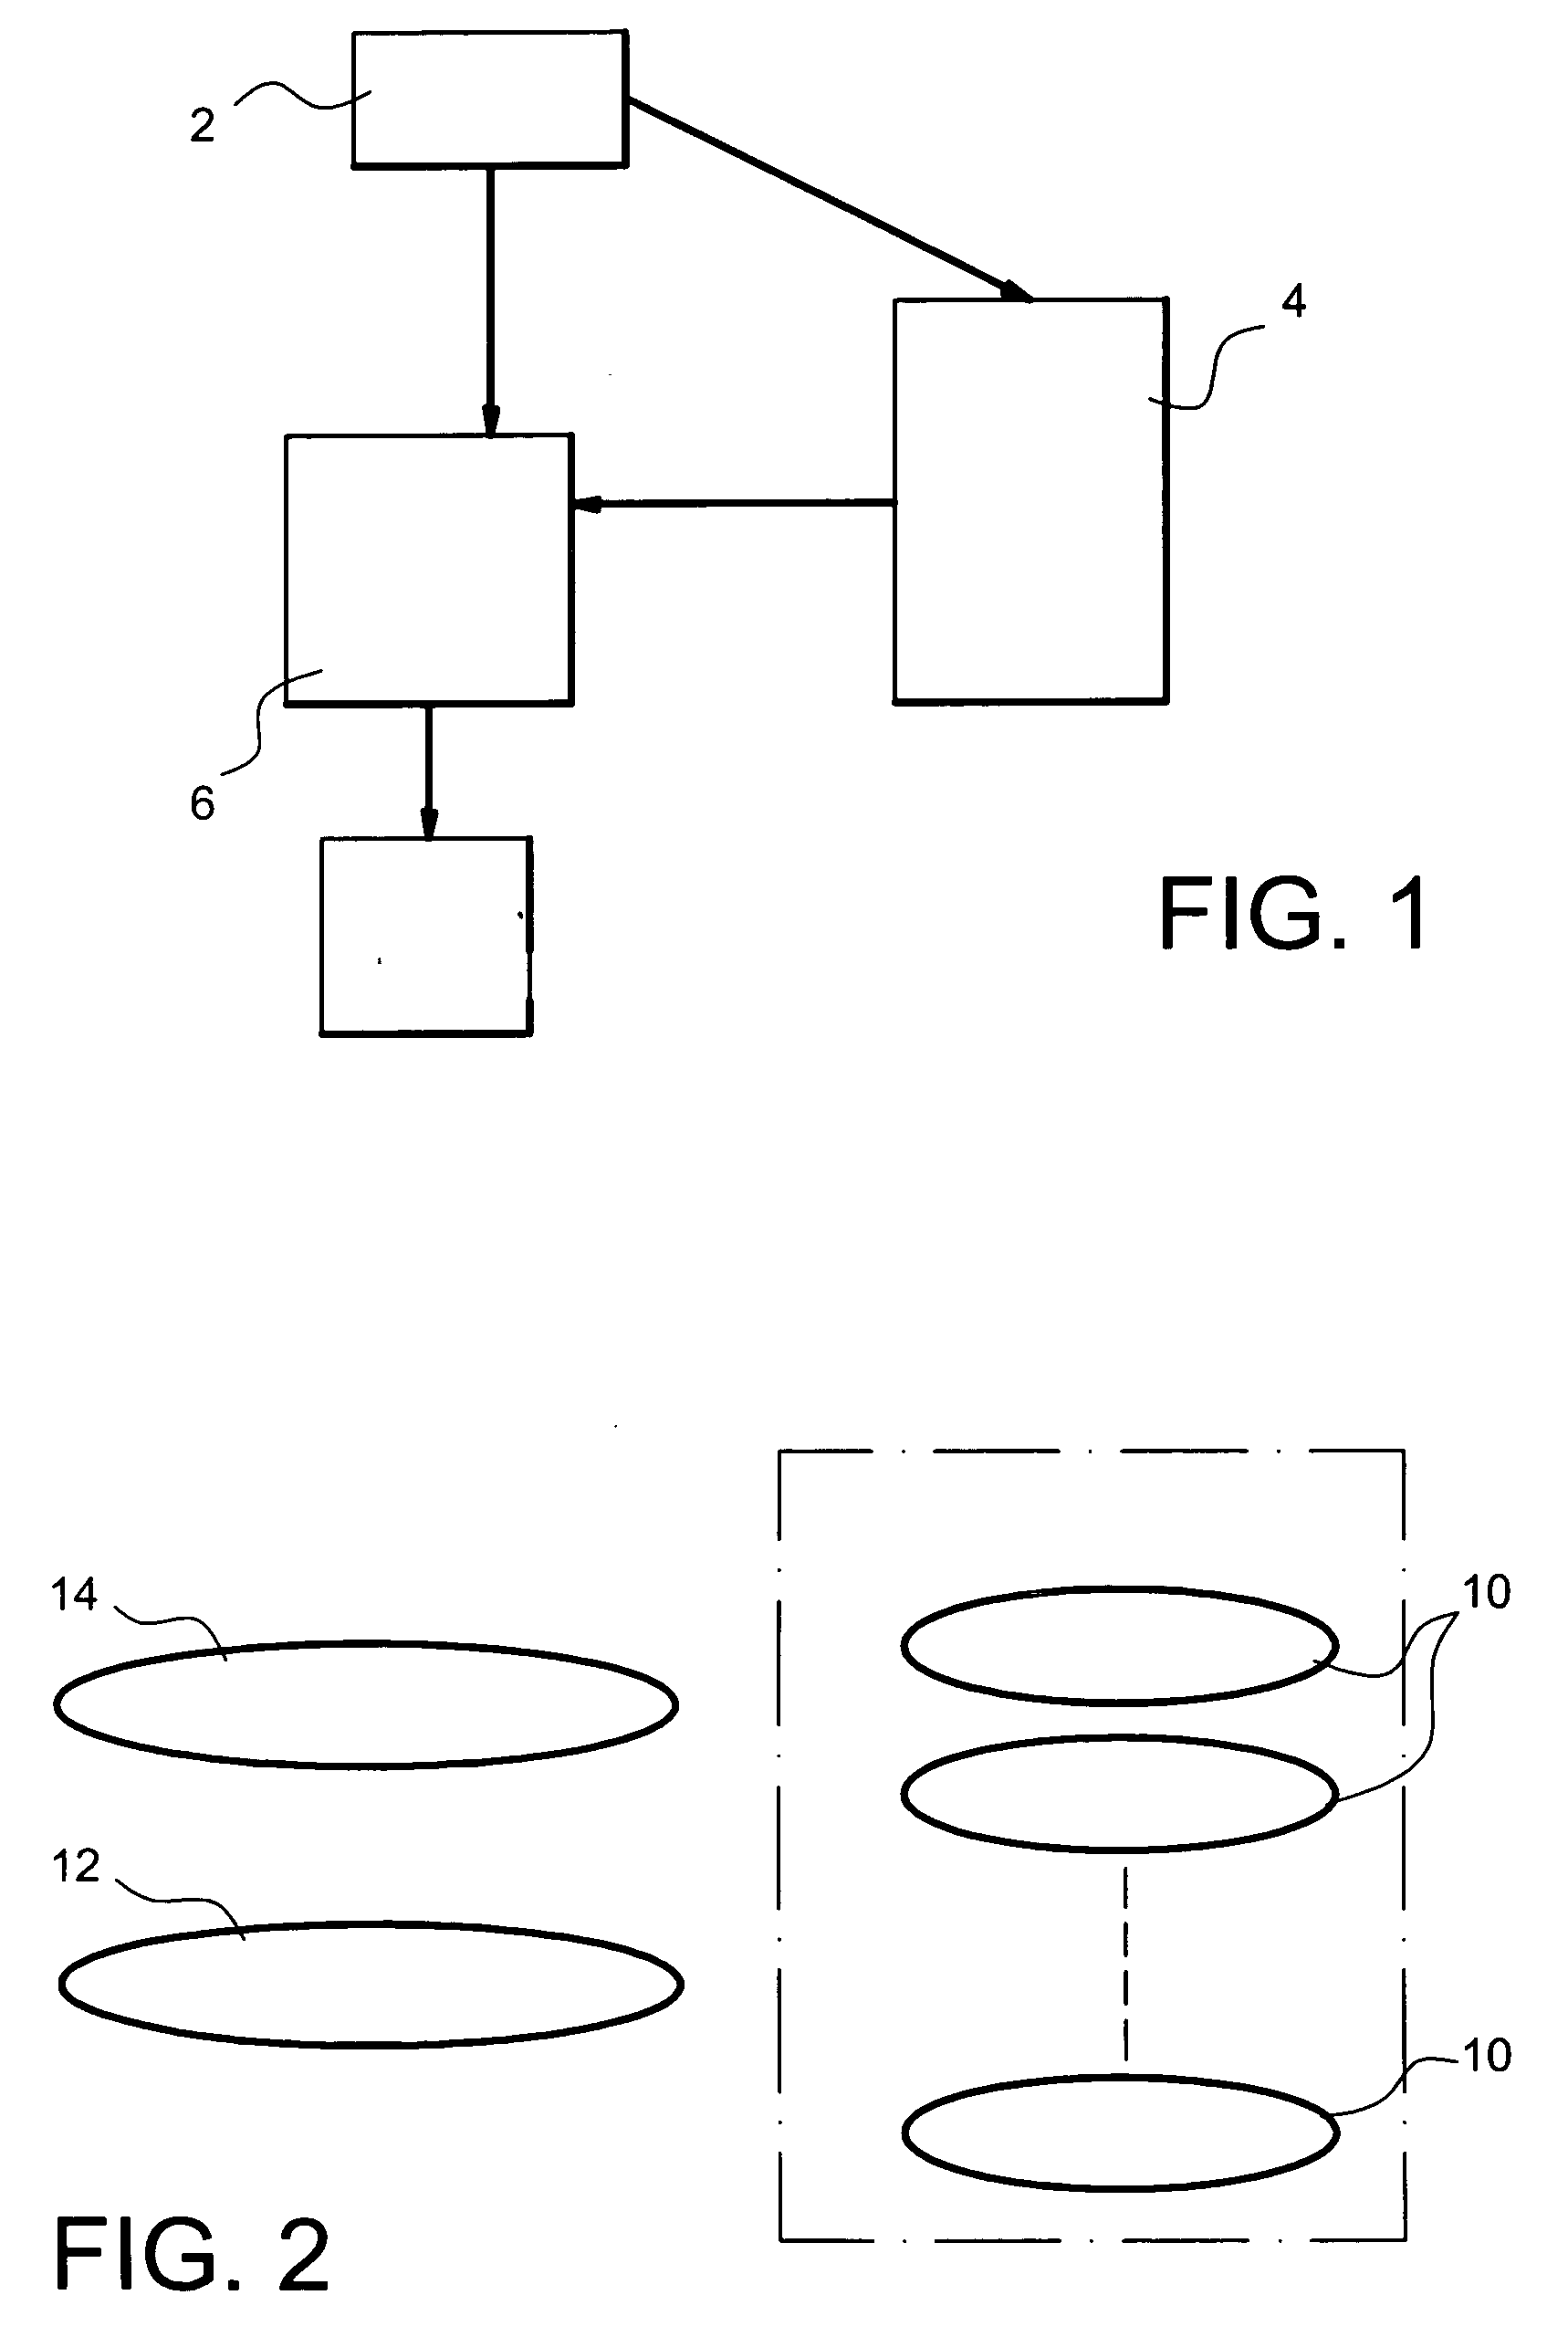 Method of generating a performance model from a functional model